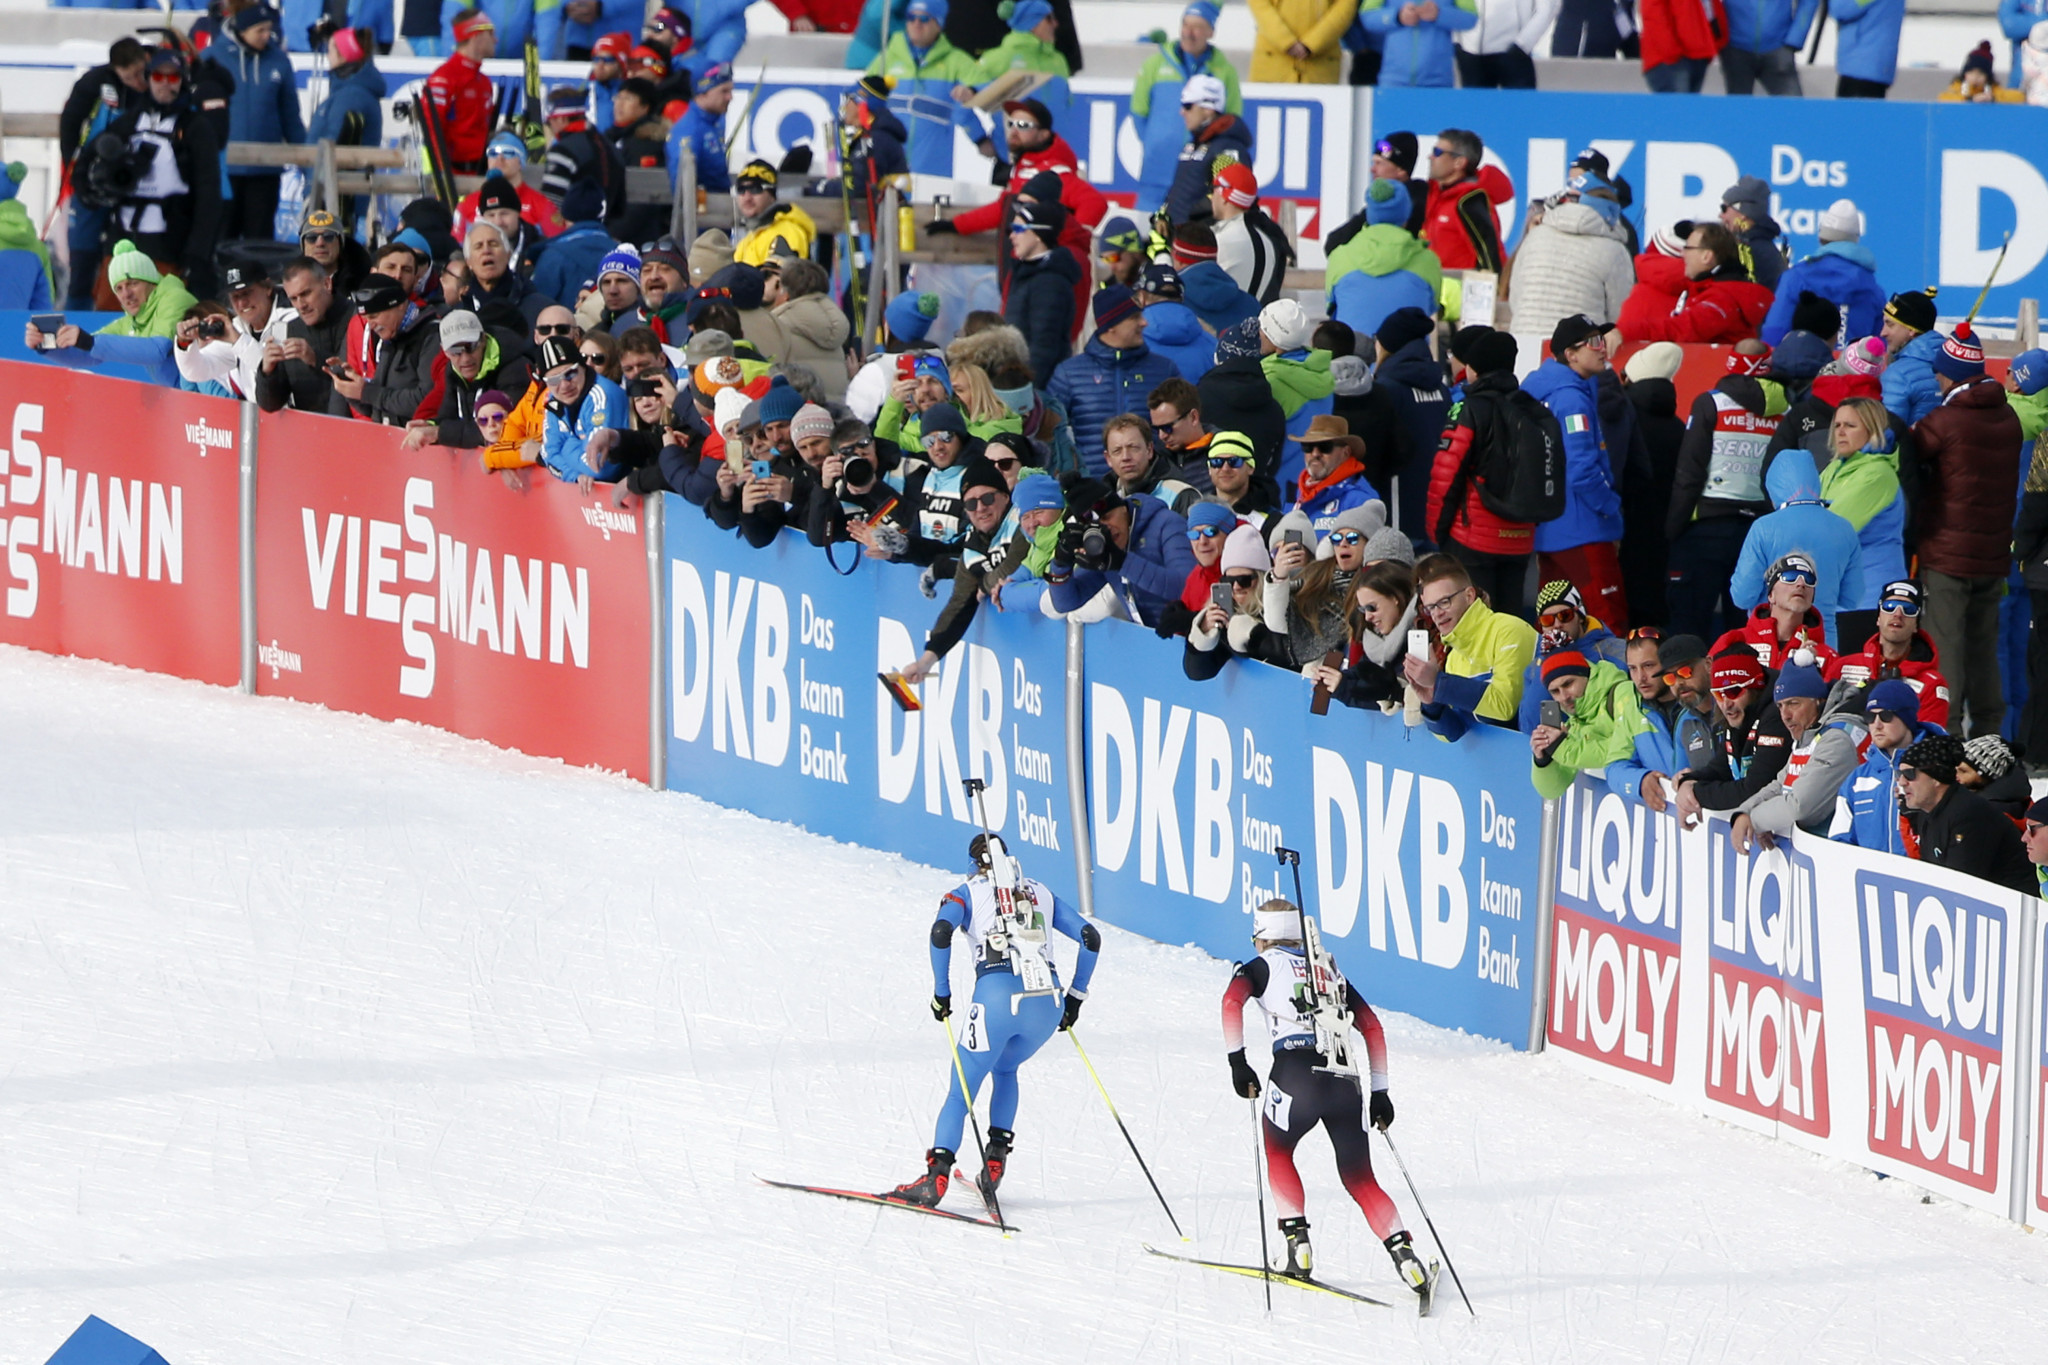 Johannes Thingnes Bø grew Norway's lead in the final leg to seal victory ©Getty Images